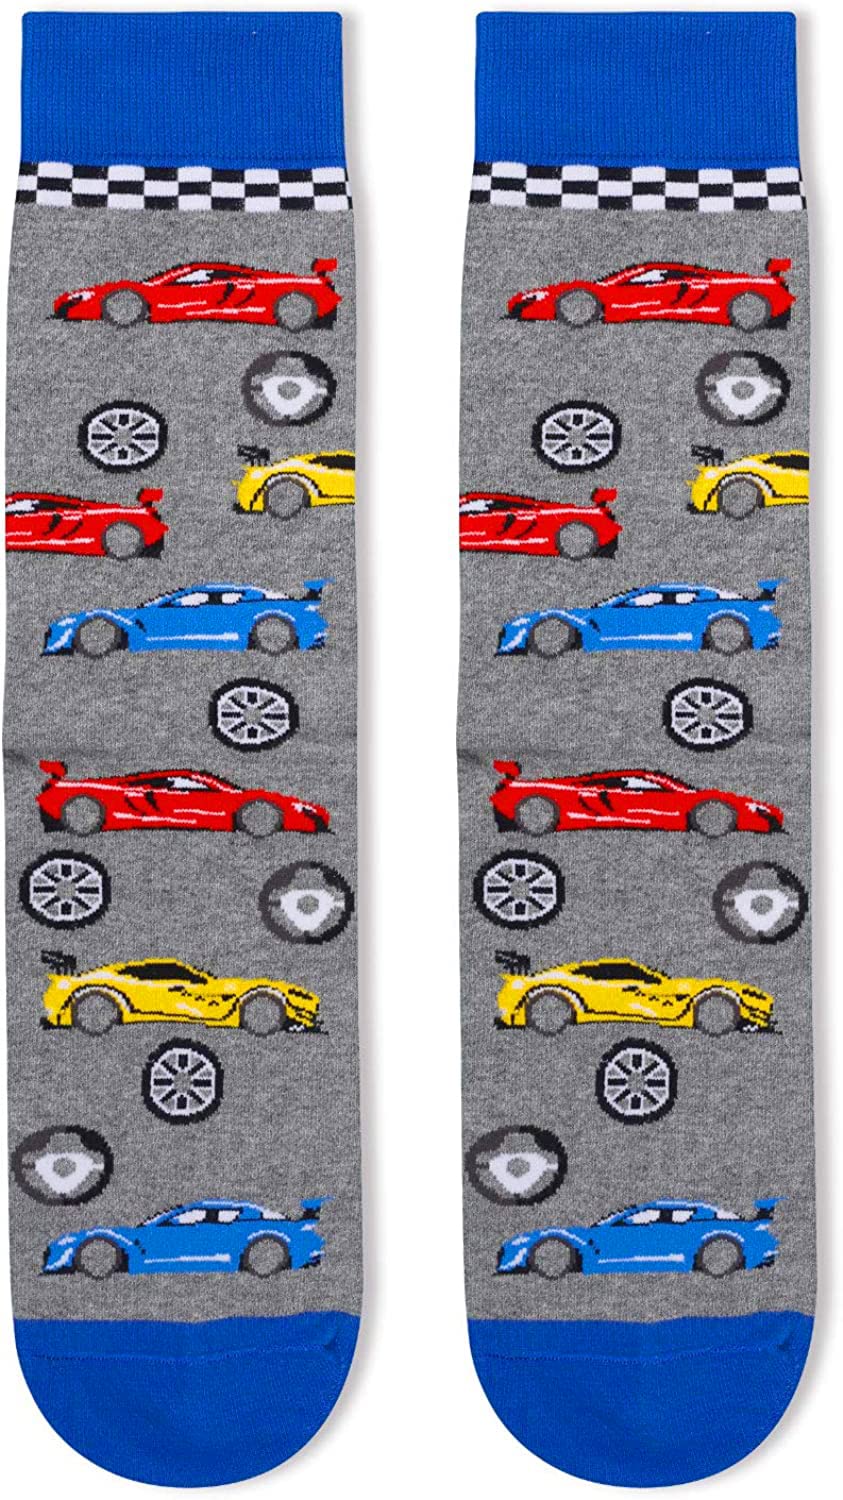 Zmart Gifts For Car Lovers, Funny Racing Car Gifts, Drag Racing Gifts For Men, Vintage Cool Old Race Car Socks For Men Stocking Stuffers